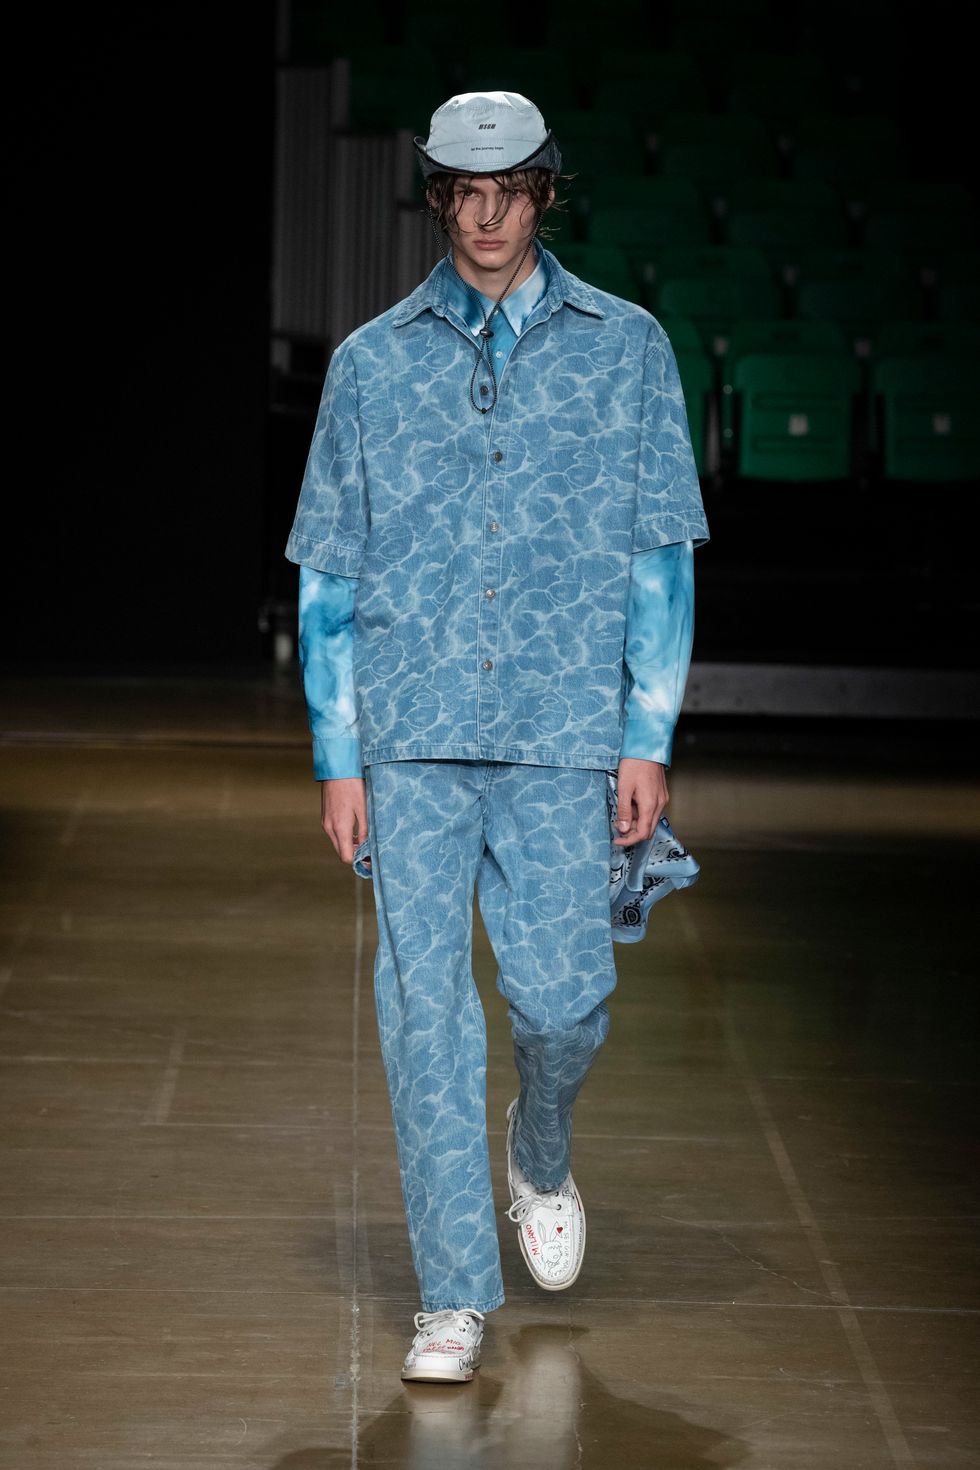 Louis Vuitton, Y/Project and Menswear Trends From Spring 2020 - PAPER